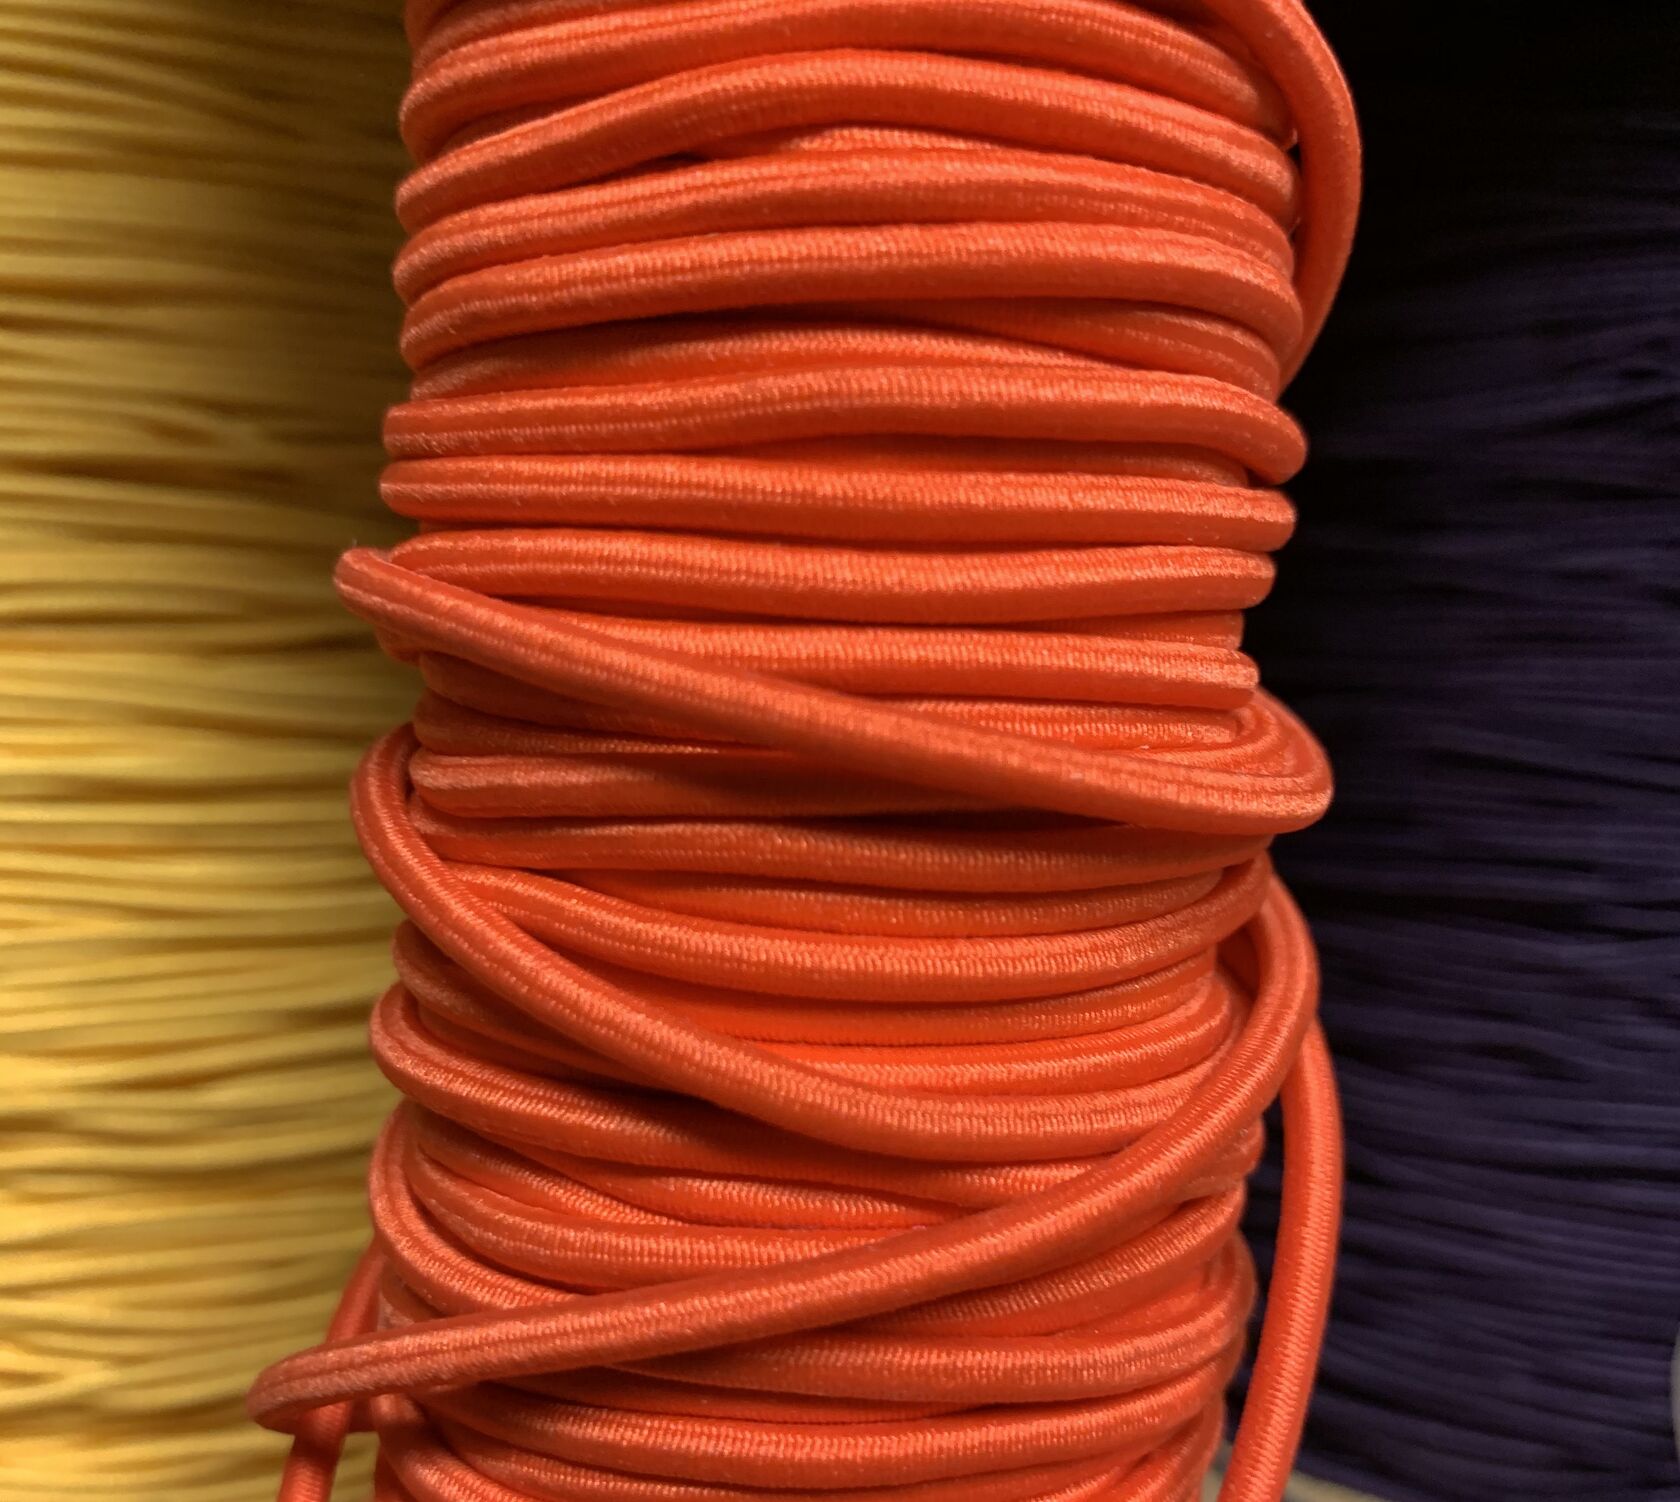 Round Elastic Cord 2,5 Mm Wide for Various Crafting Projects, Orange  Elastic Rope for Bracelets, 0.10 Inches Wide Thin Cord 